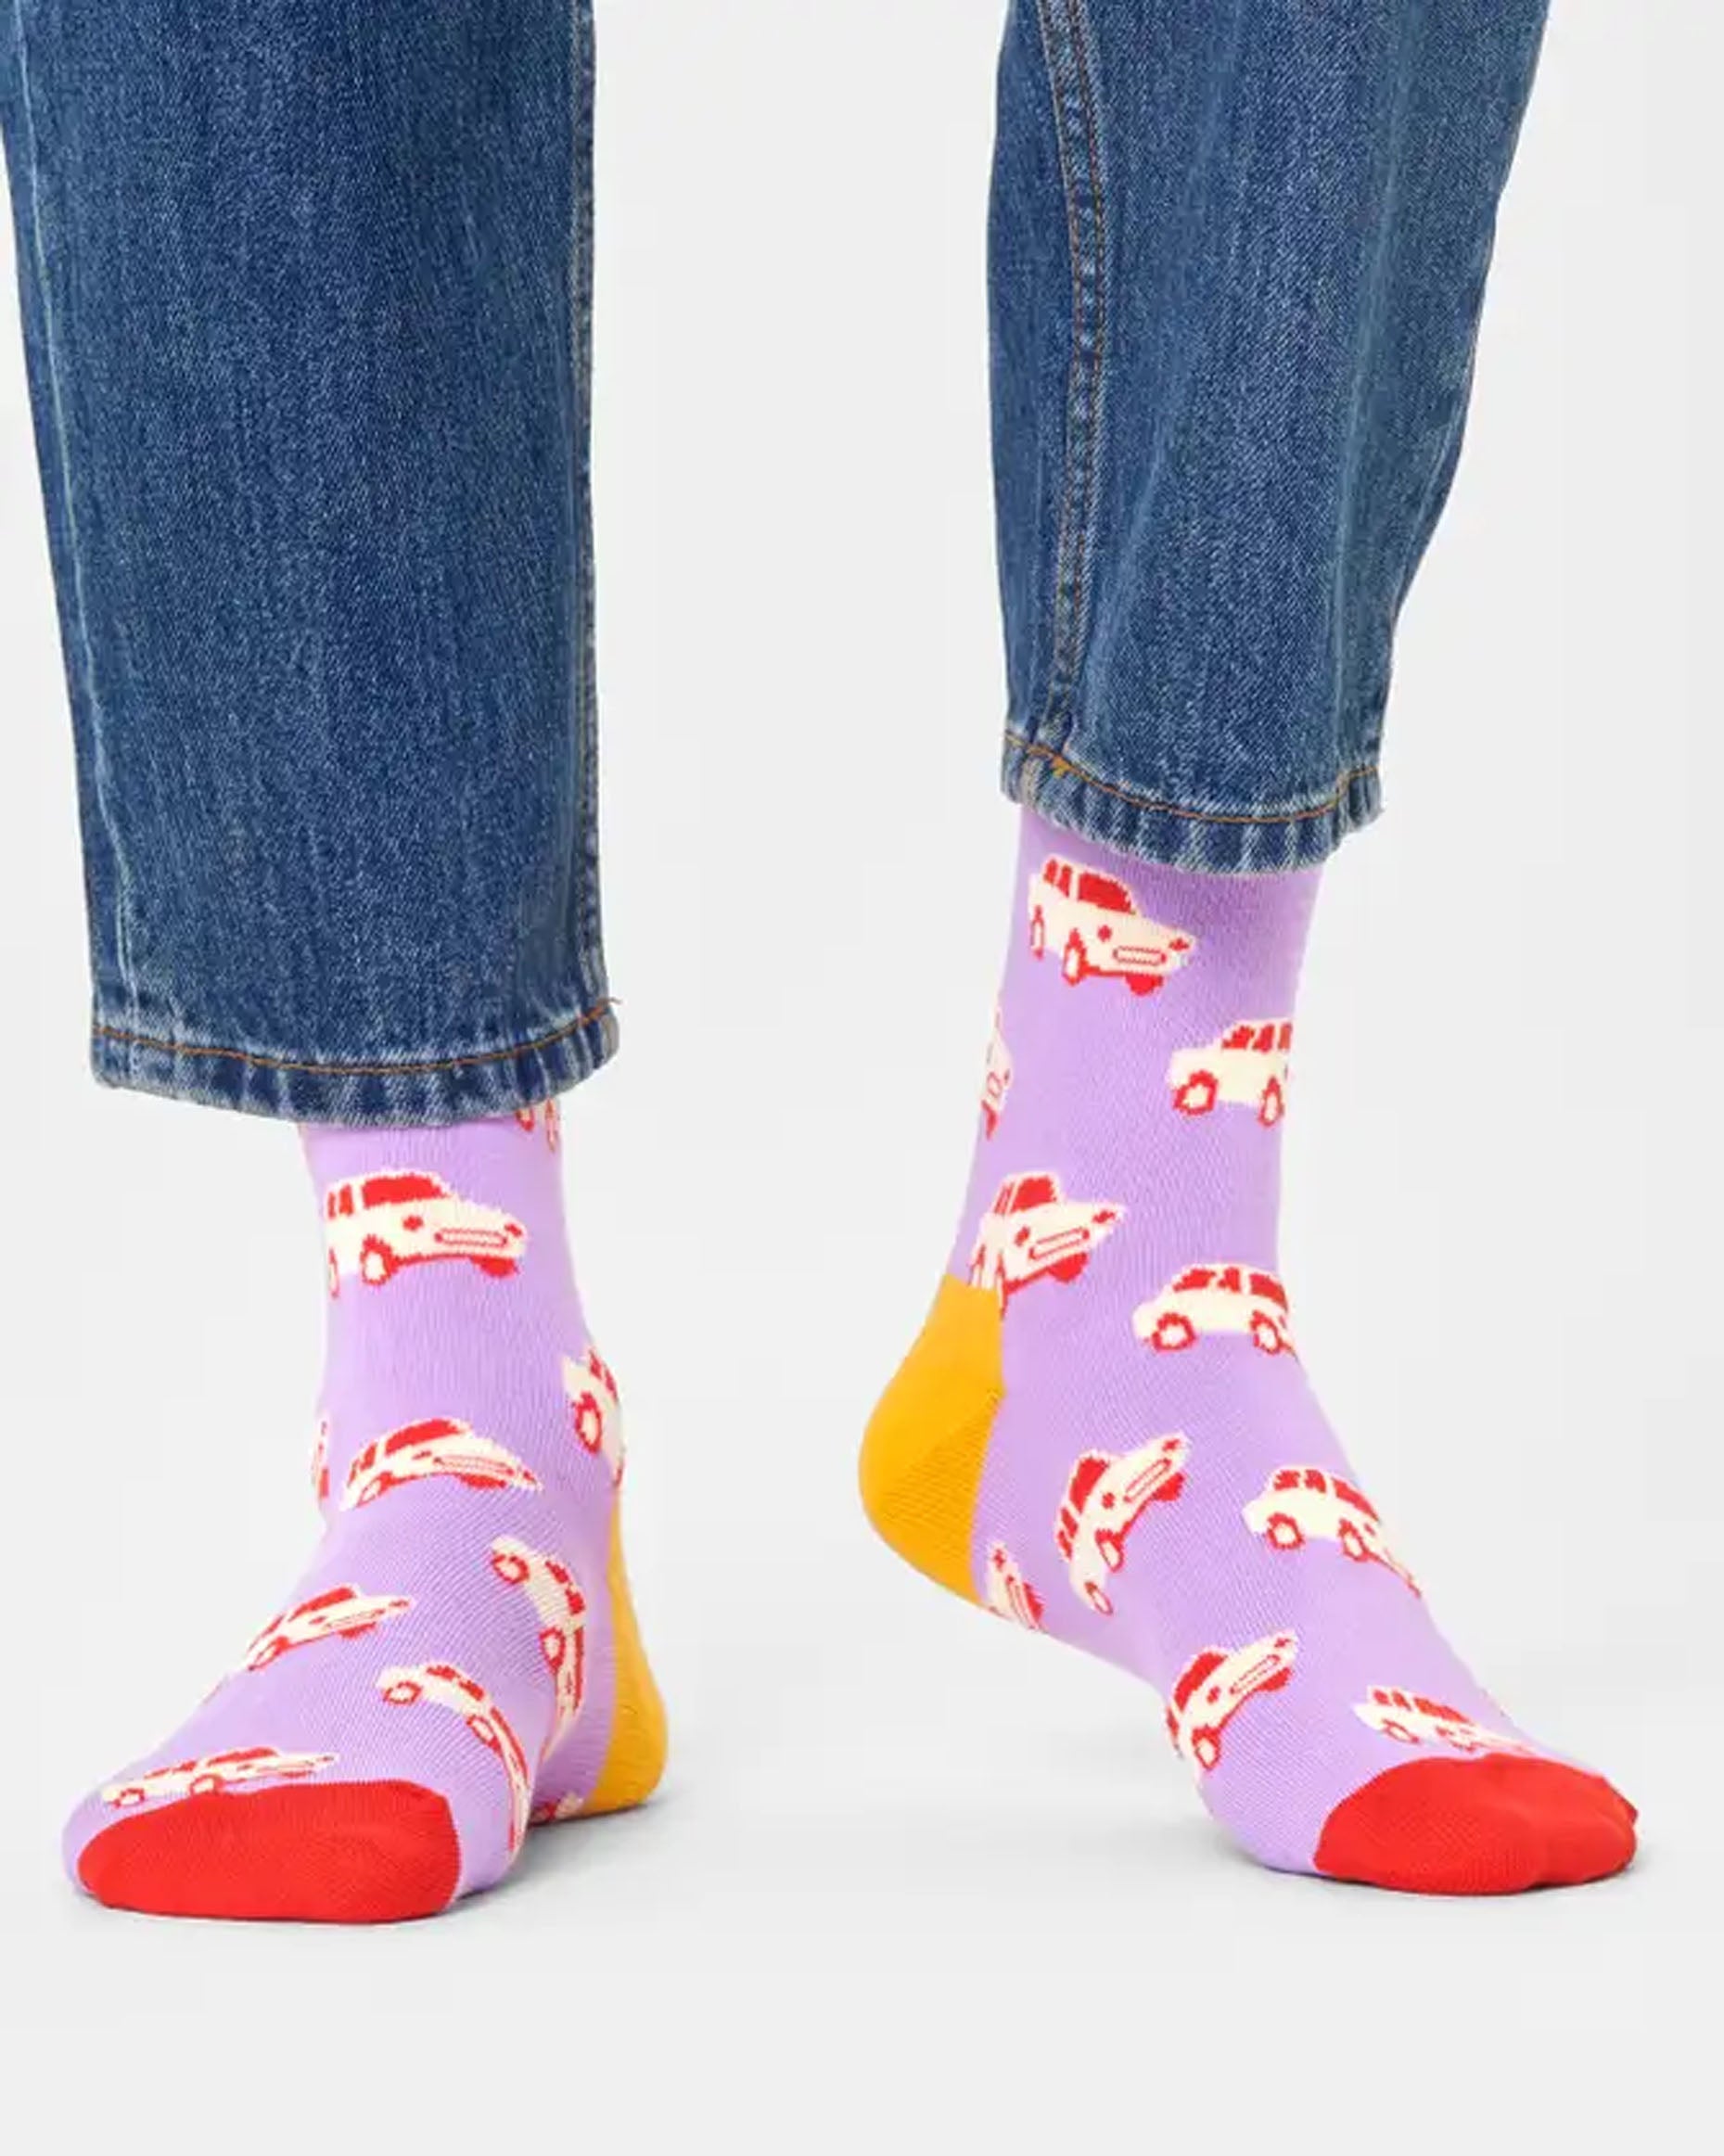 Happy Socks Car Sock - Lilac cotton crew length ankle socks with a vintage car pattern in cream and red, wine coloured cuff, mustard heel and red toe worn with blue denim jeans.